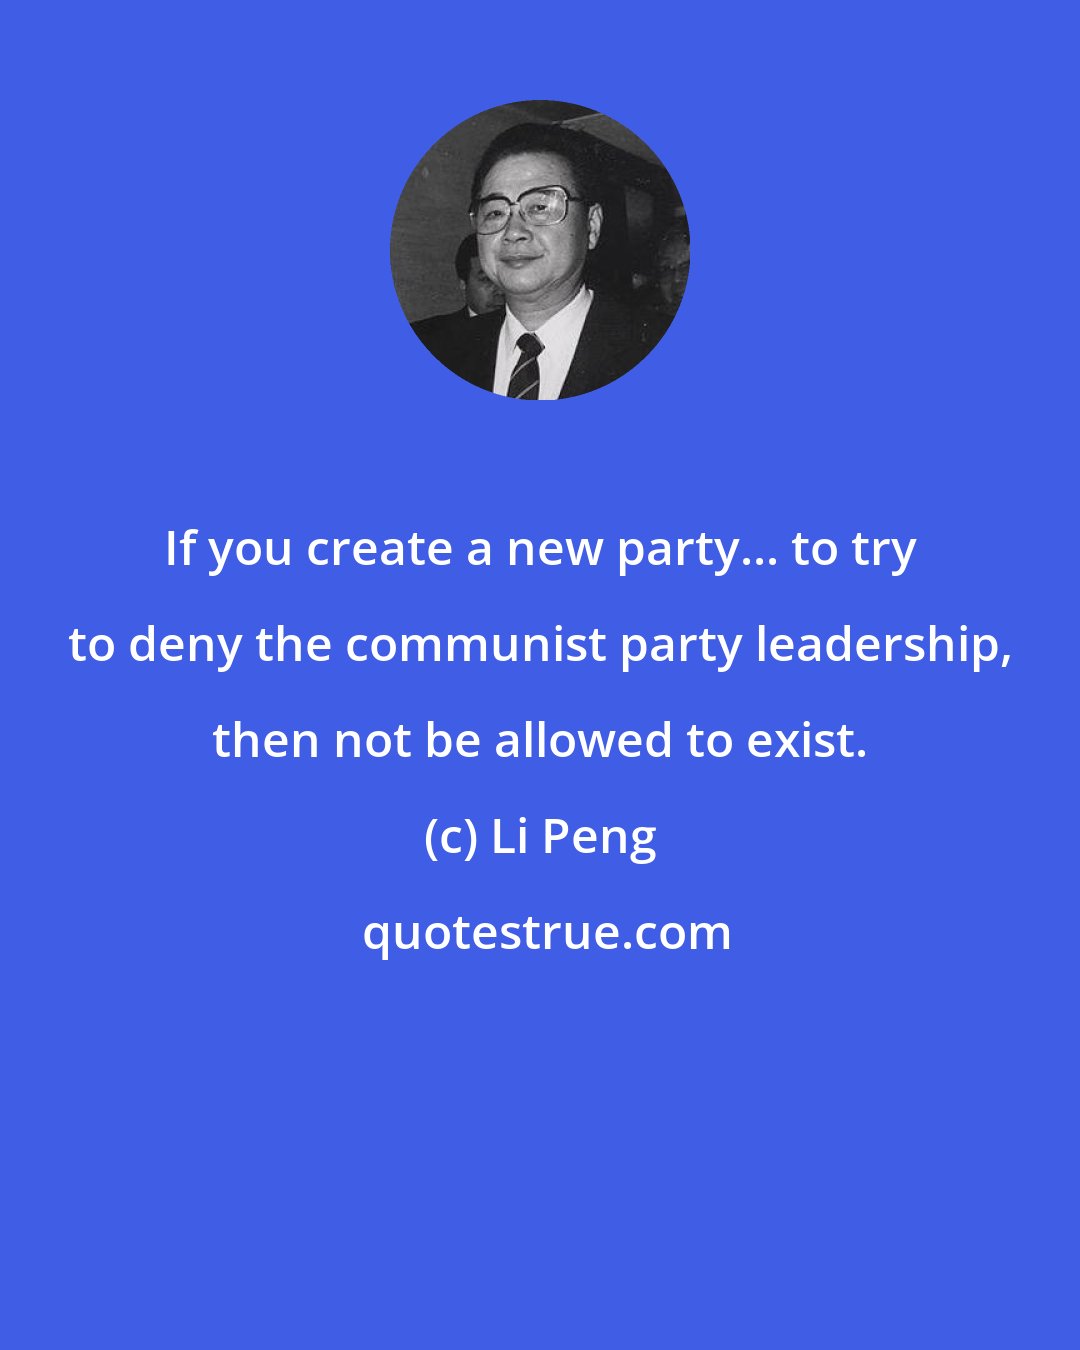 Li Peng: If you create a new party... to try to deny the communist party leadership, then not be allowed to exist.